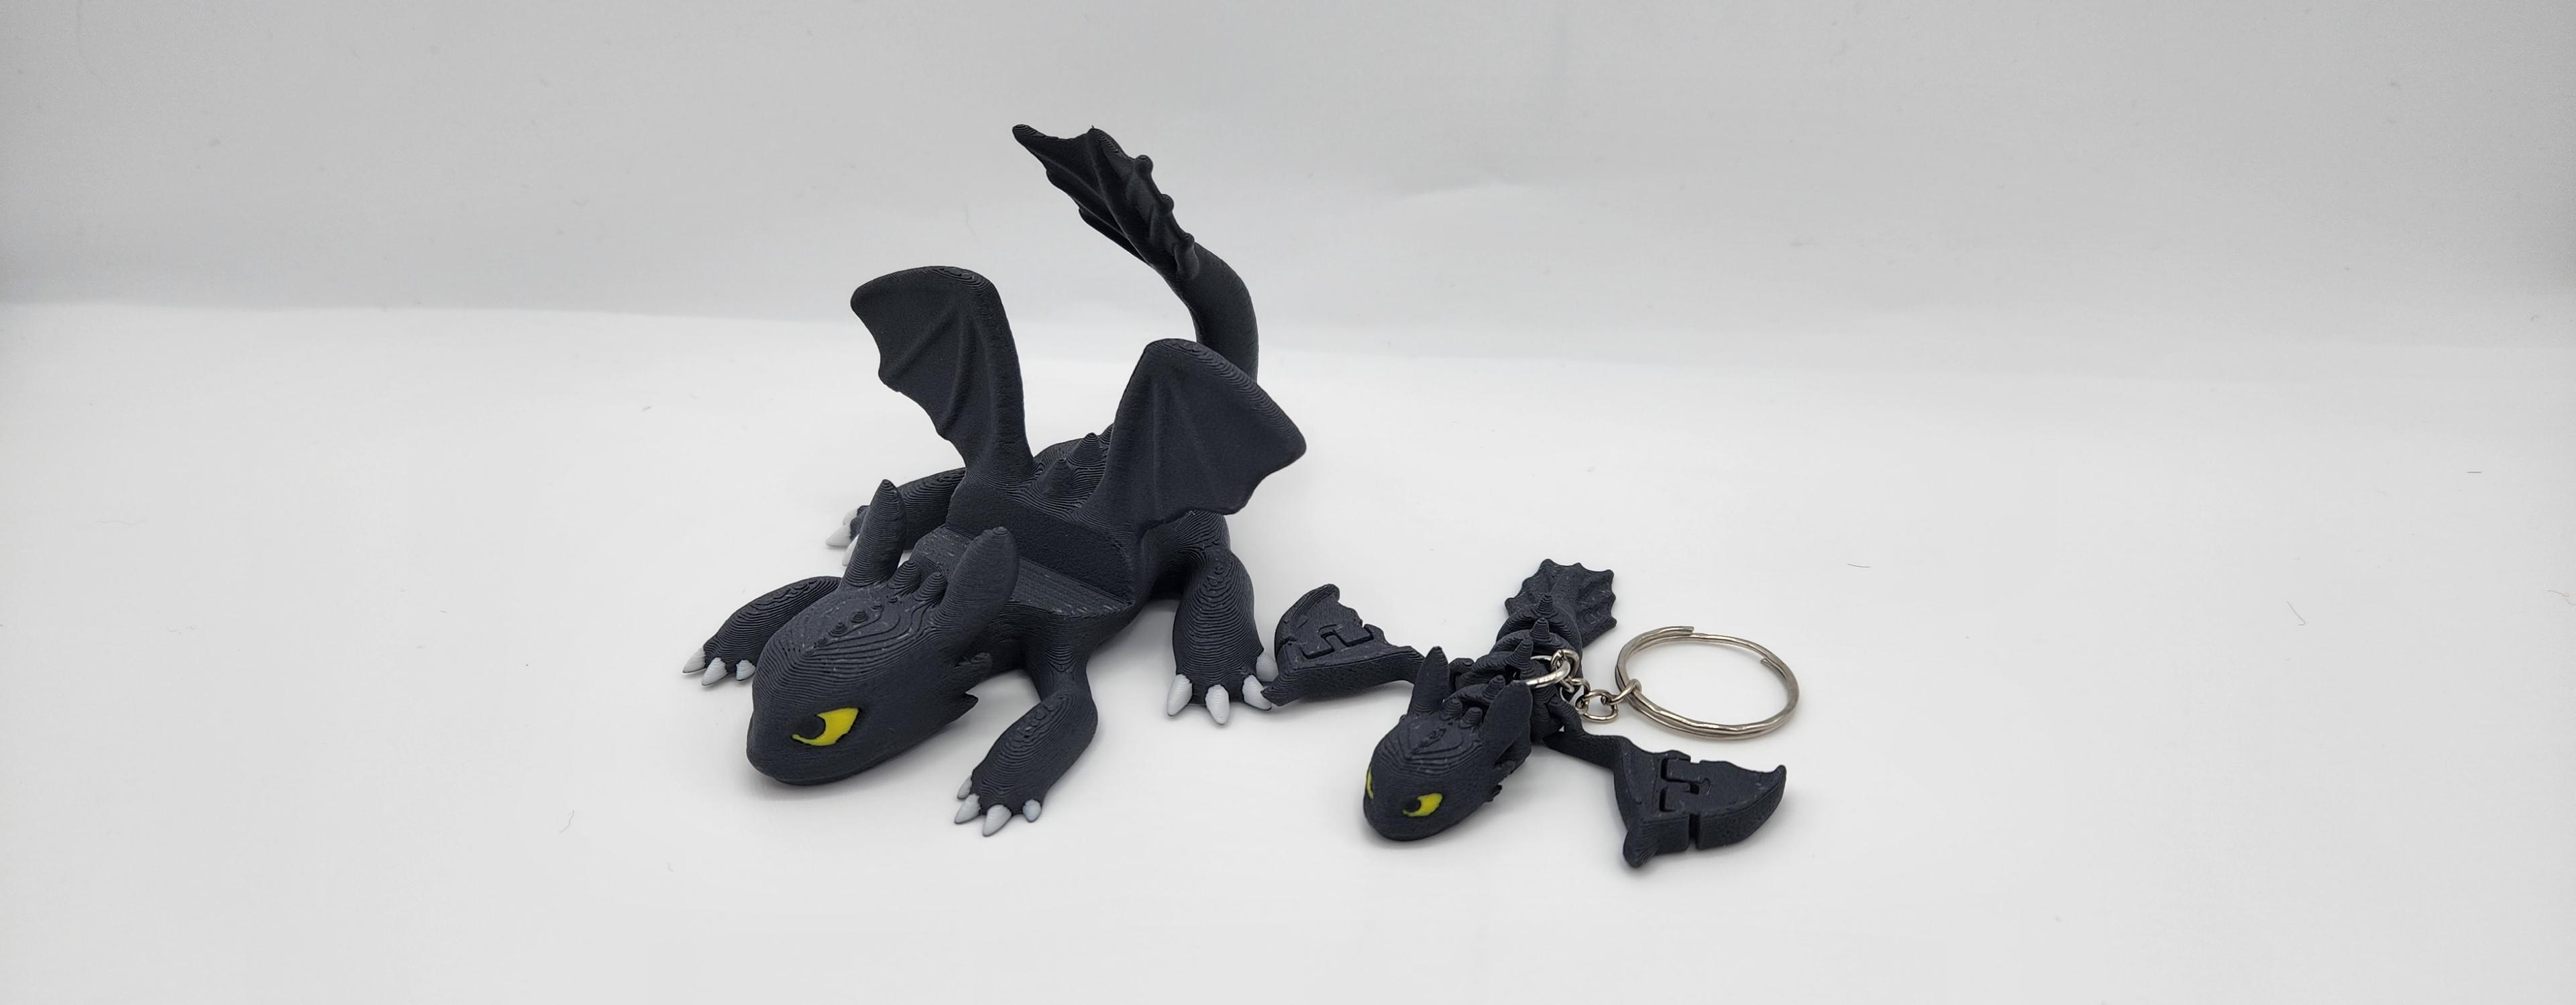 Toothless phone stand & Toothless keychain here now